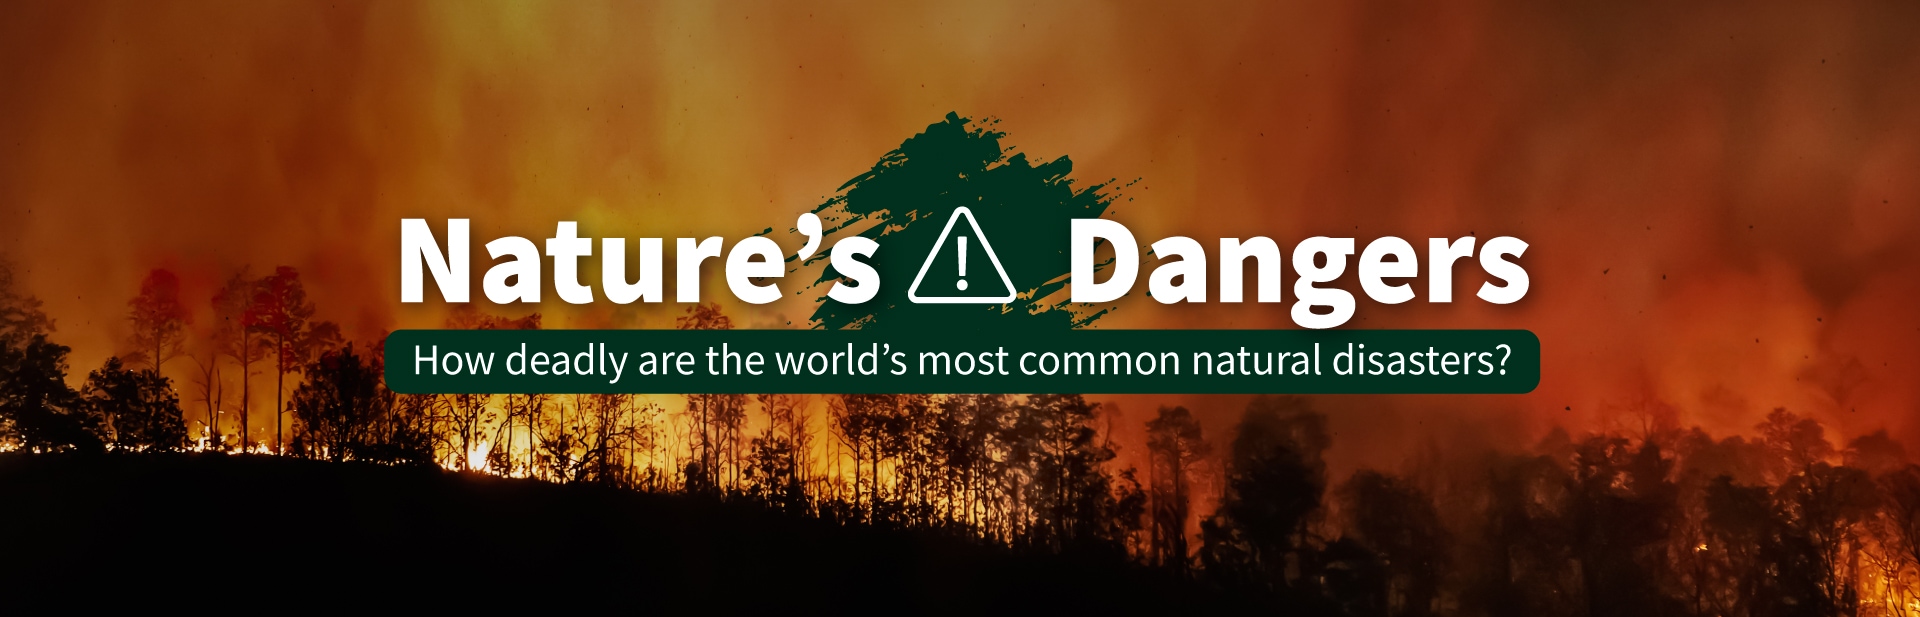 Nature’s Dangers: How Deadly Are The World’s Most Common Natural Disasters?